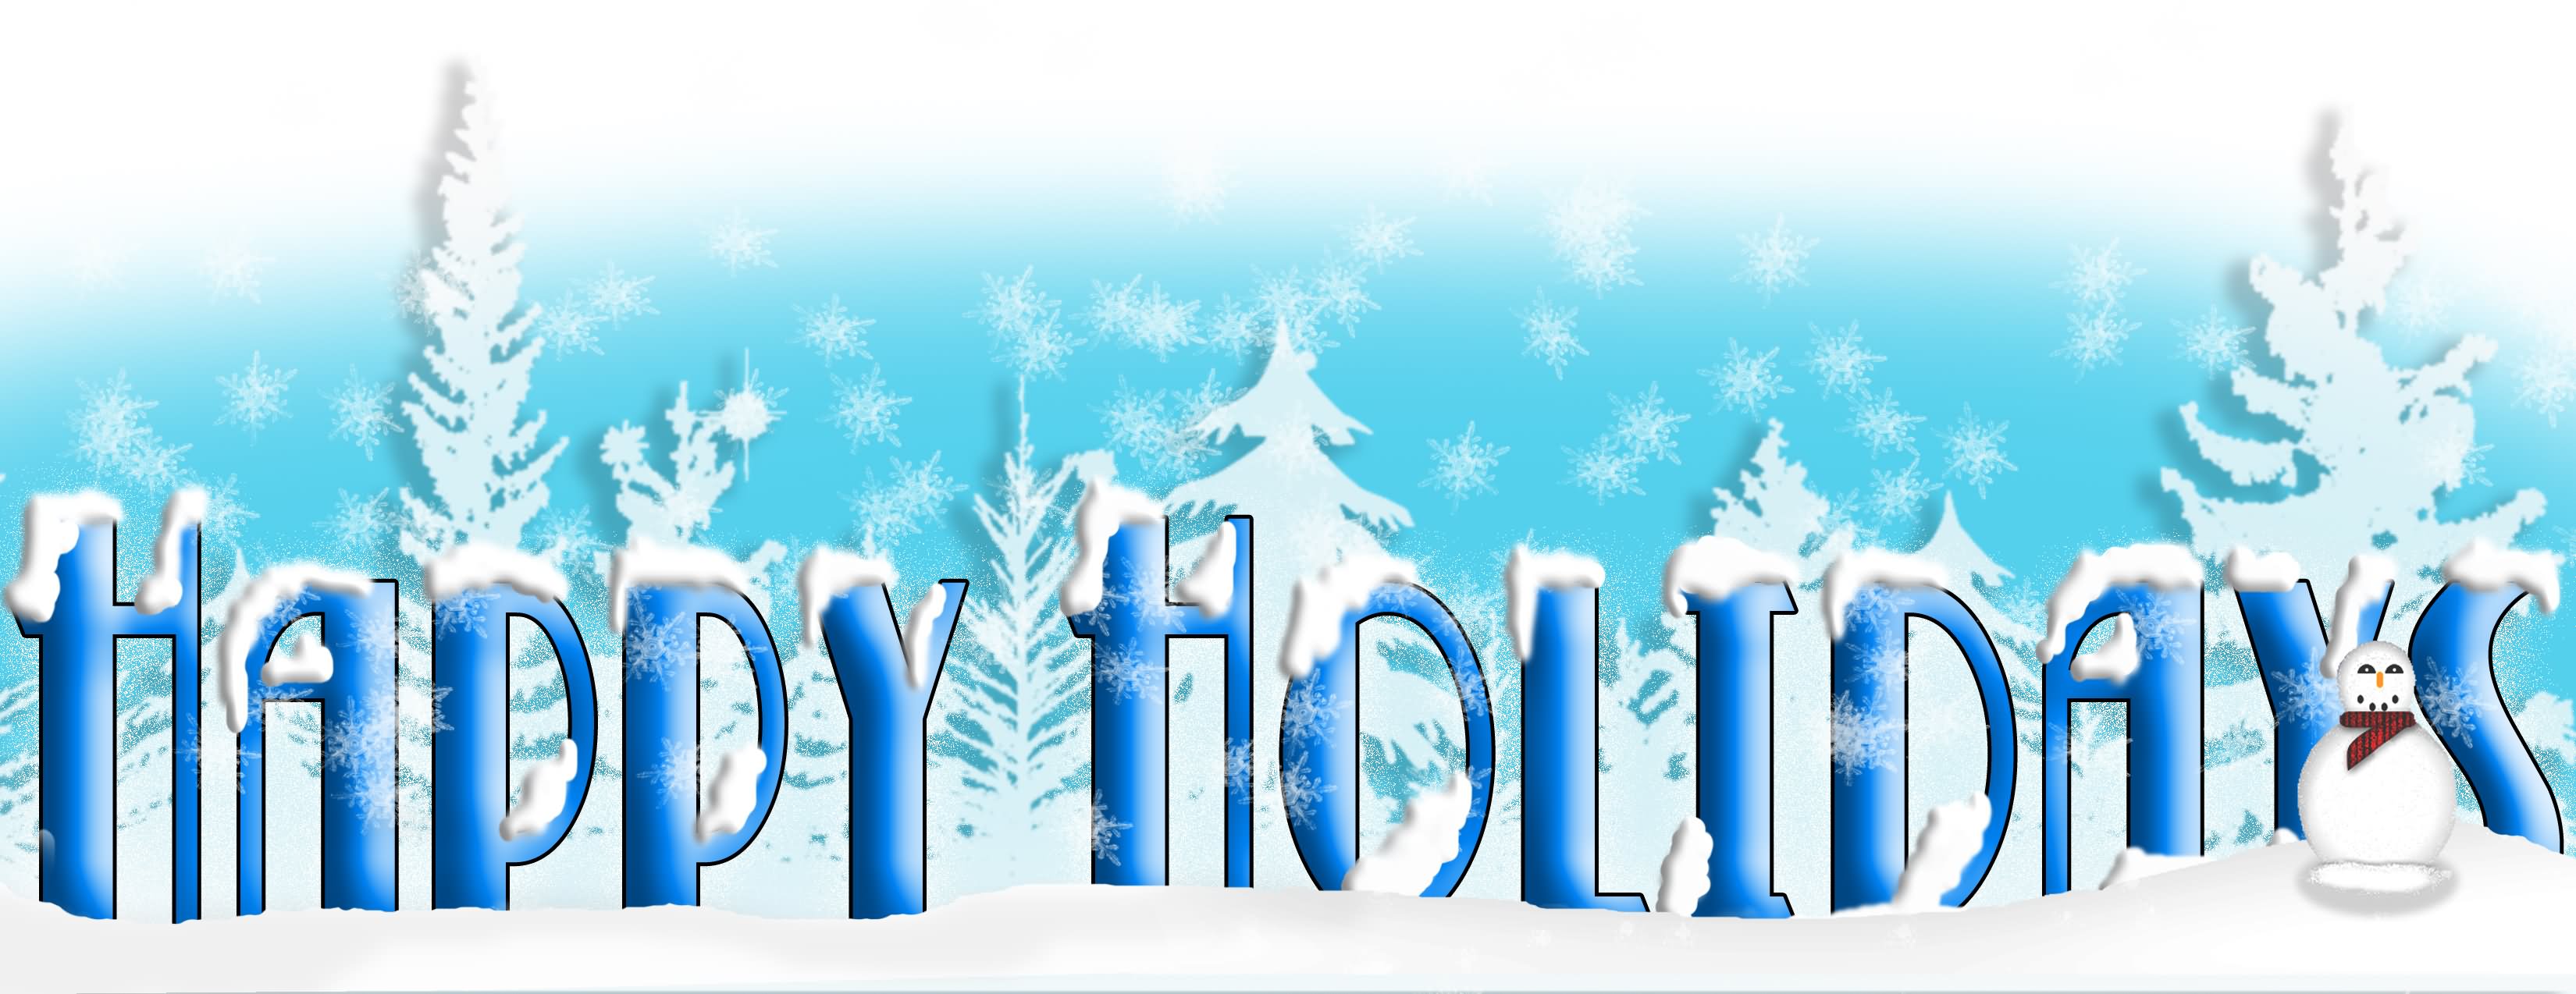 For Forums   Url Http   Www Imagesbuddy Com Happy Holidays Banner Blue